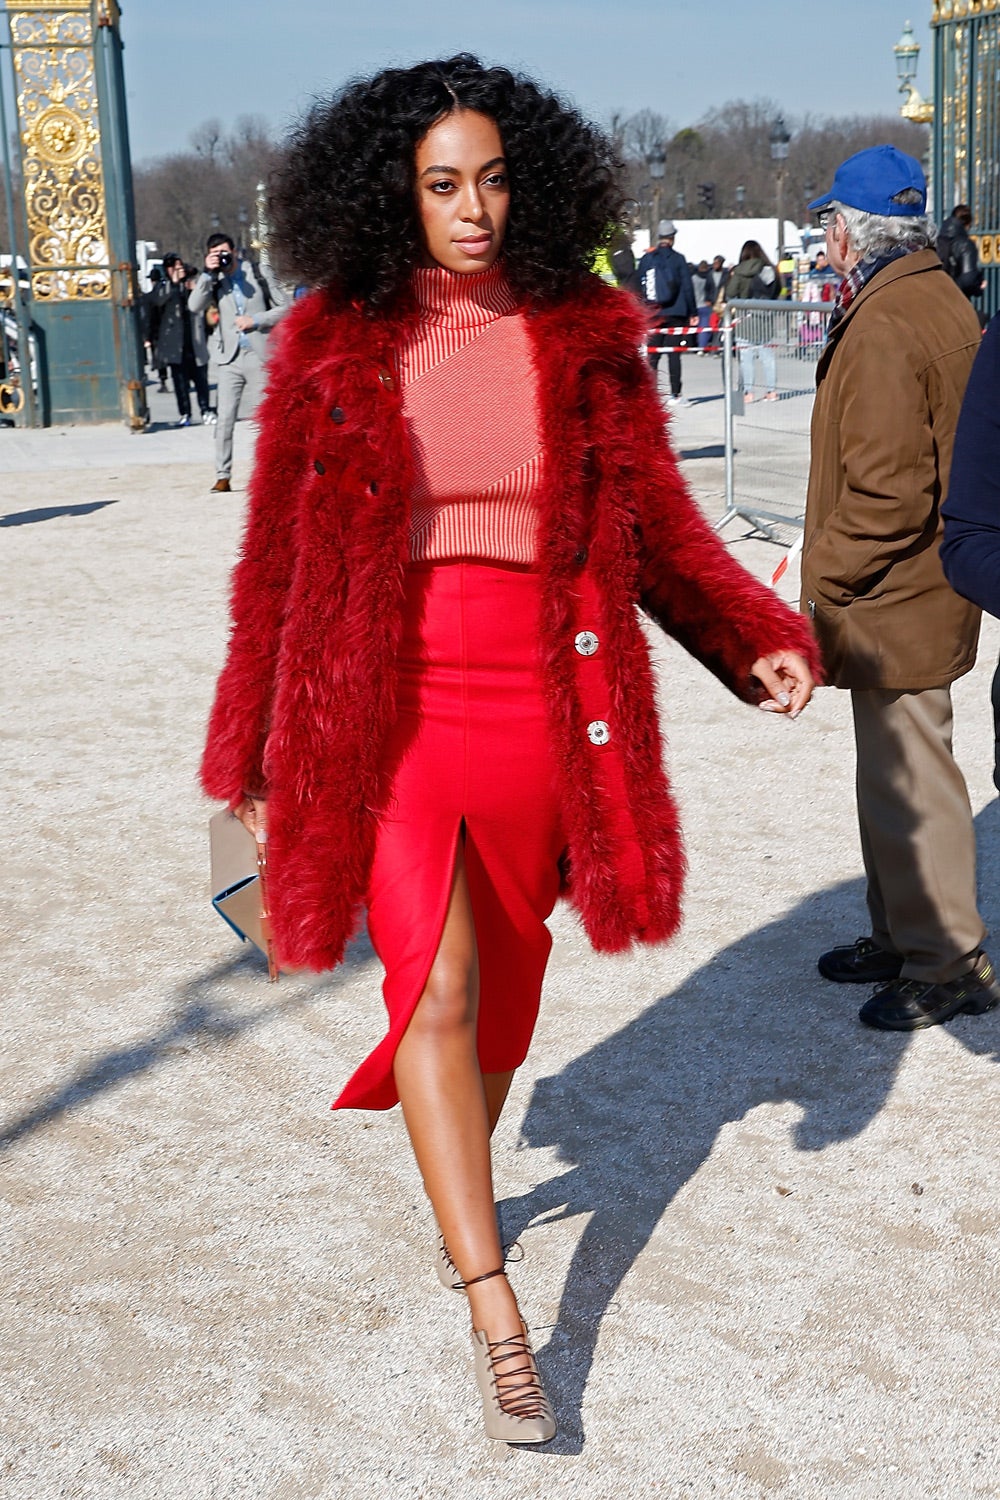 We Had the Ultimate Style Crush on These 13 Fabulous Celebs This Year